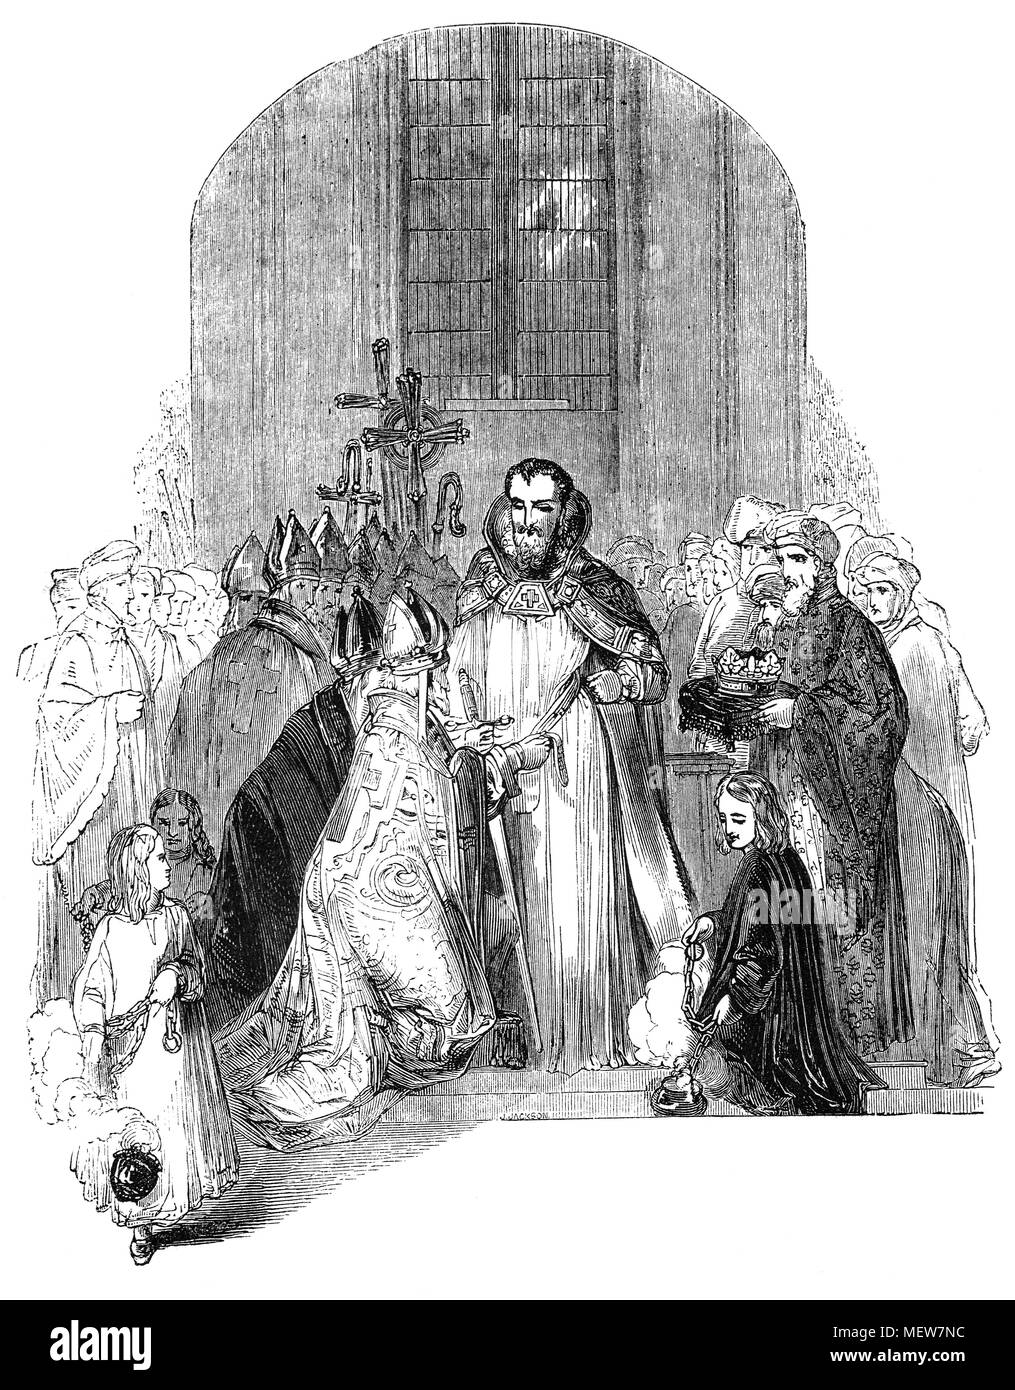 The coronation in Westminster Abbey of Henry IV (1367 -1413), aka Henry Bolingbroke who was King of England and Lord of Ireland from 1399 to 1413, and asserted the claim of his grandfather, Edward III, to the Kingdom of France.  Henry's mother was Blanche, heiress to the considerable Lancaster estates, and thus he became the first King of England from the Lancaster branch of the Plantagenets and the first King of England since the Norman Conquest whose mother tongue was English rather than French. Stock Photo